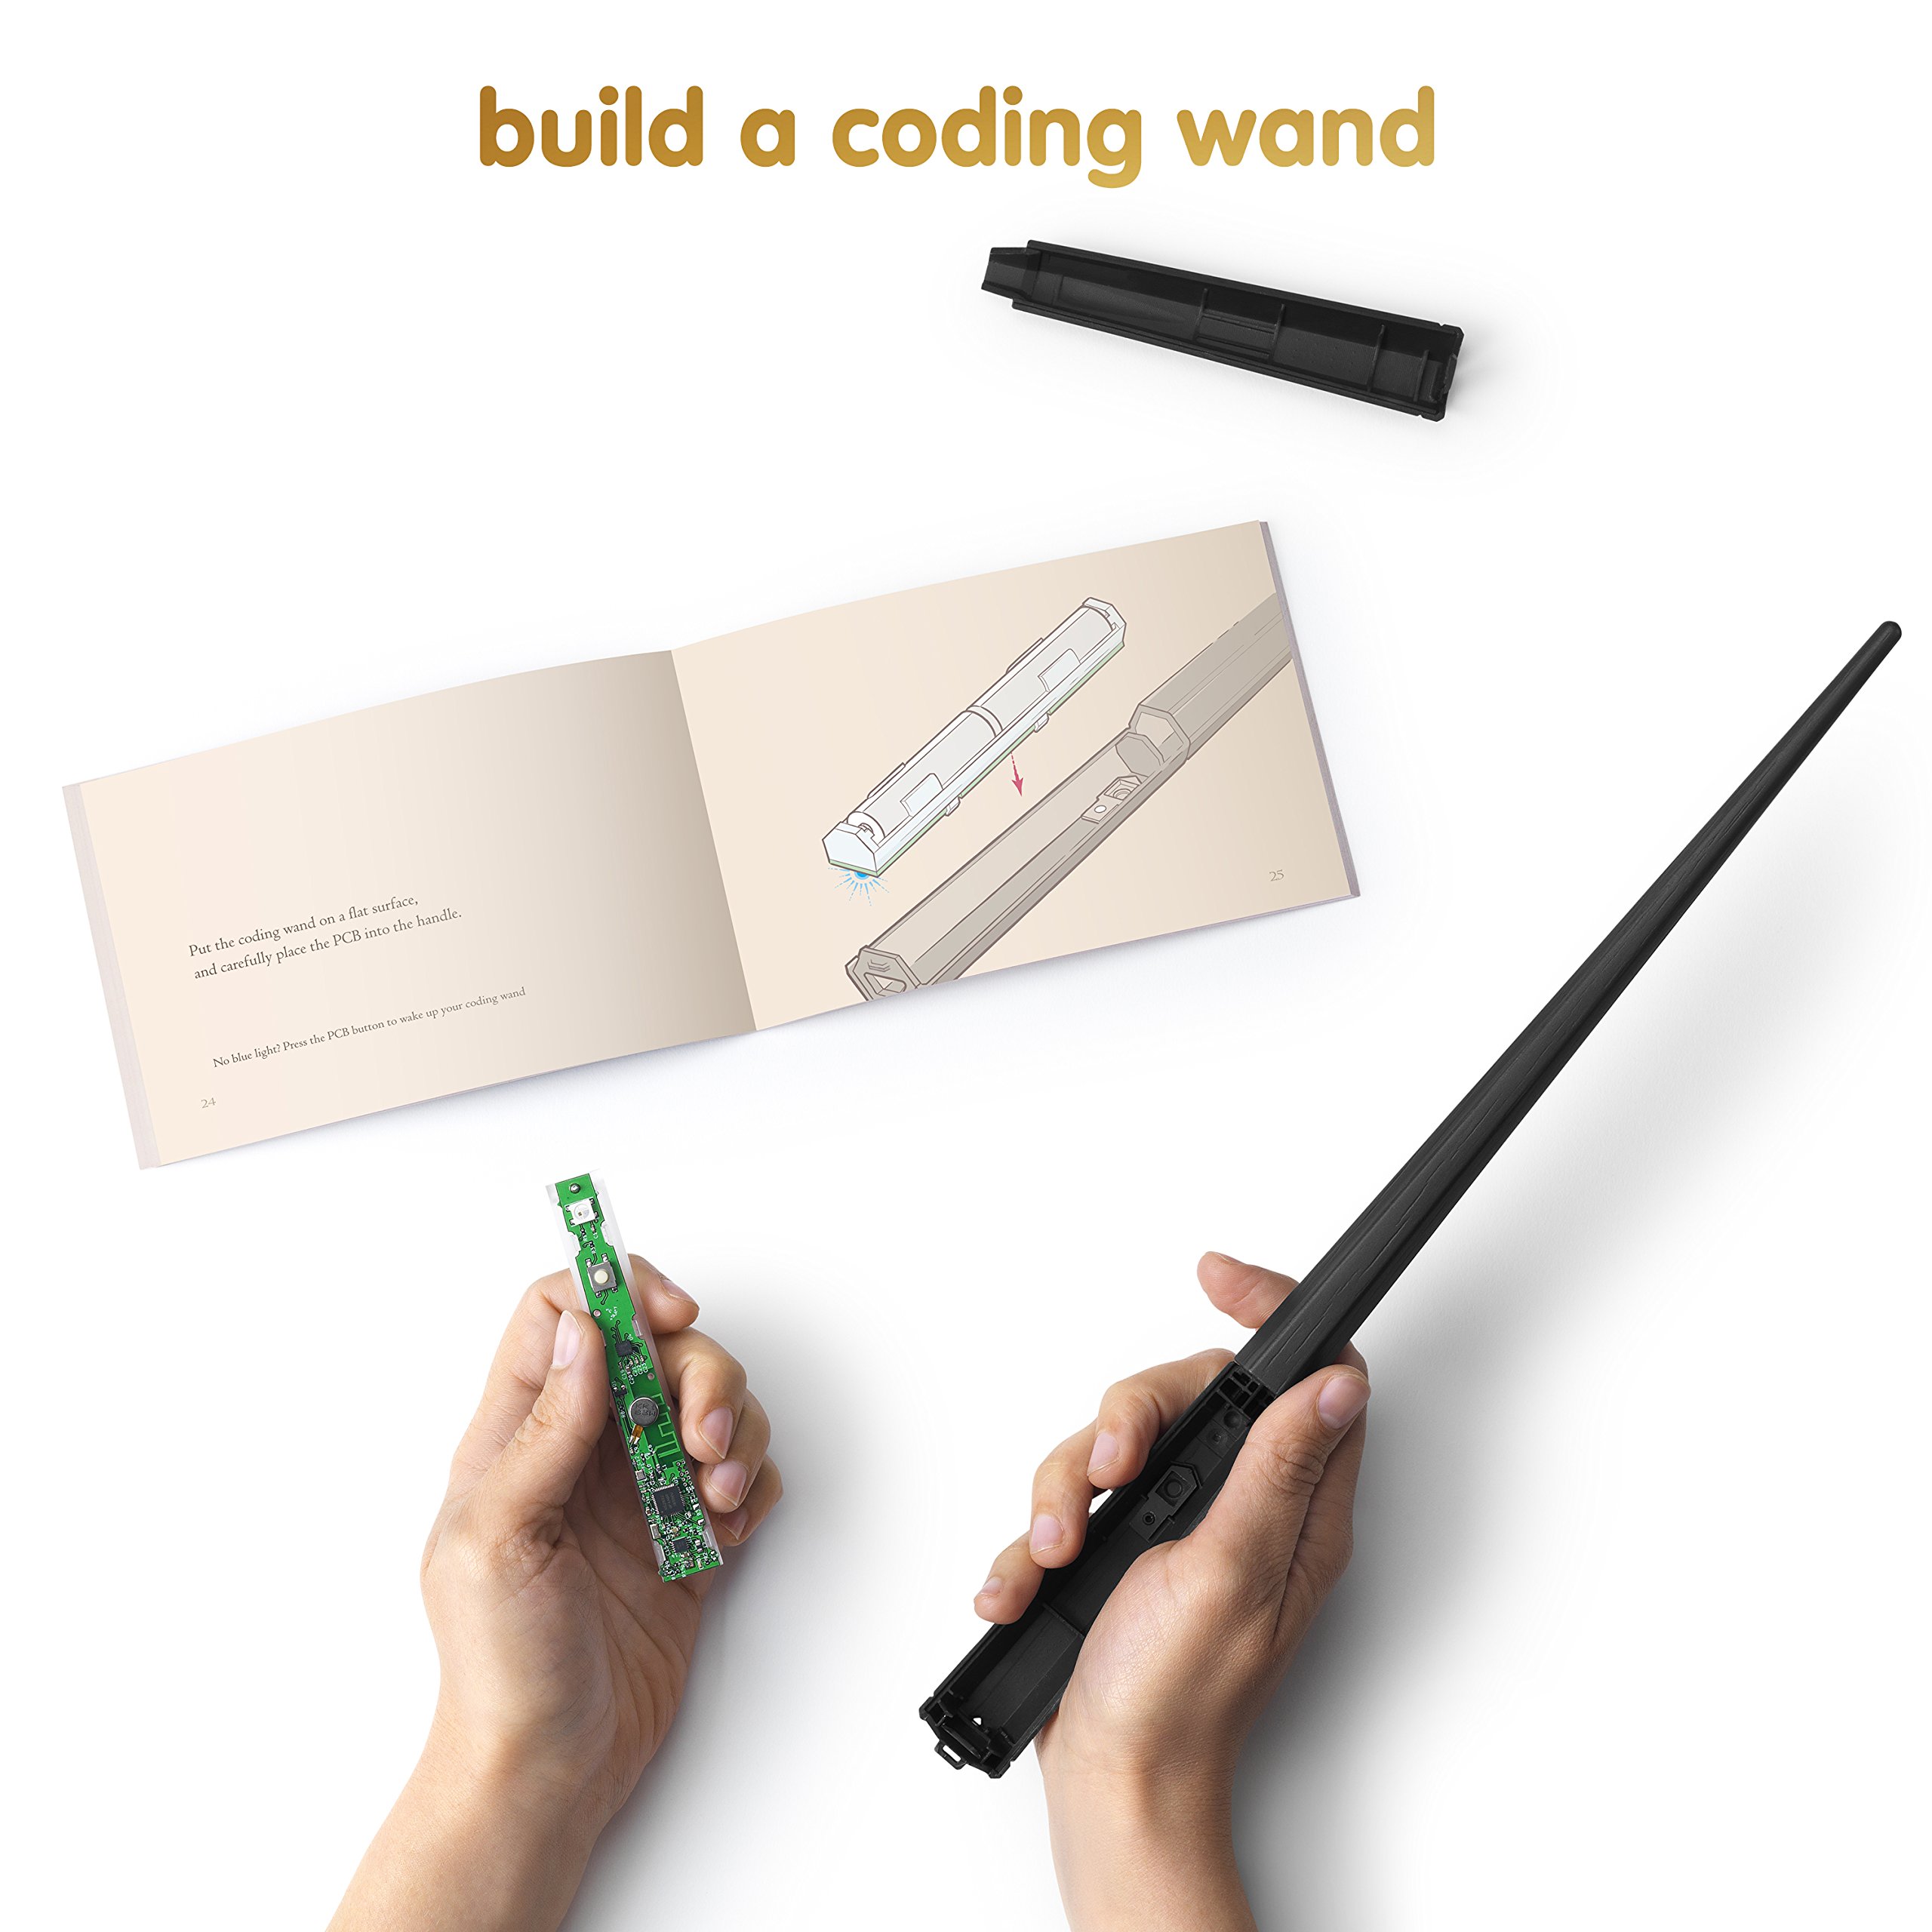 Kano Harry Potter Coding Kit – Build a Wand. Learn To Code. Make Magic.